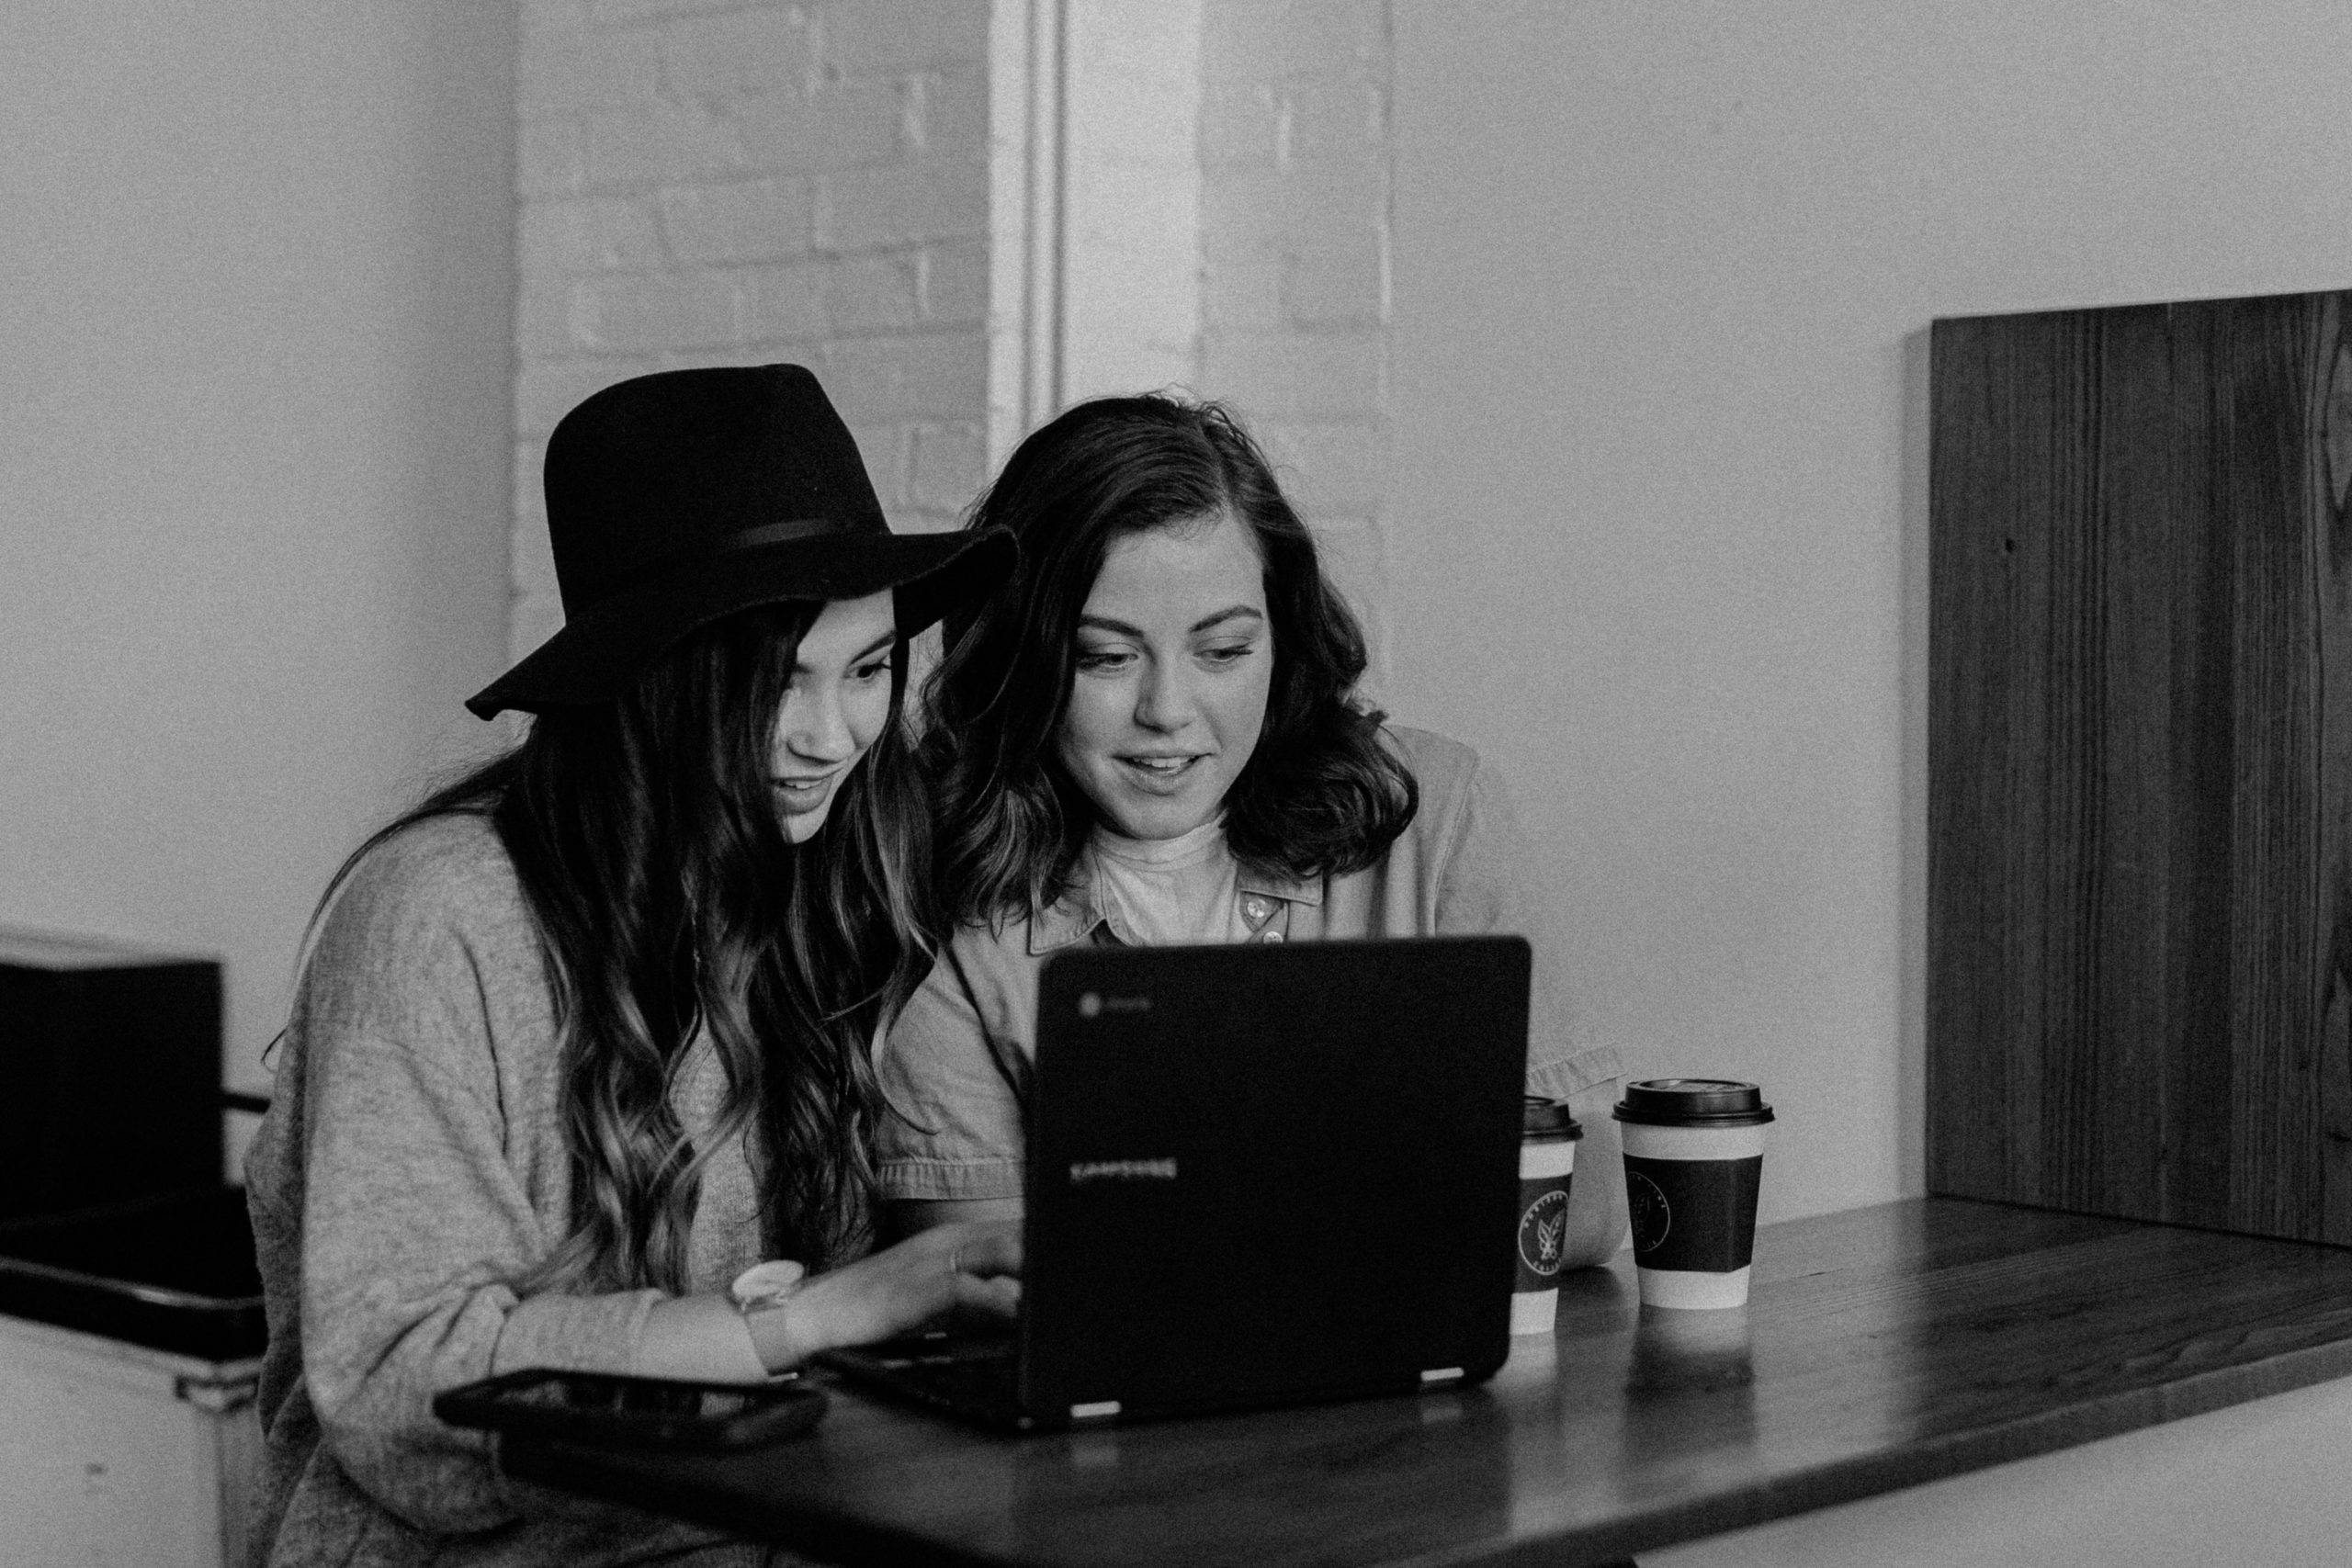 Two women sitting in a cafe, looking at their laptops.